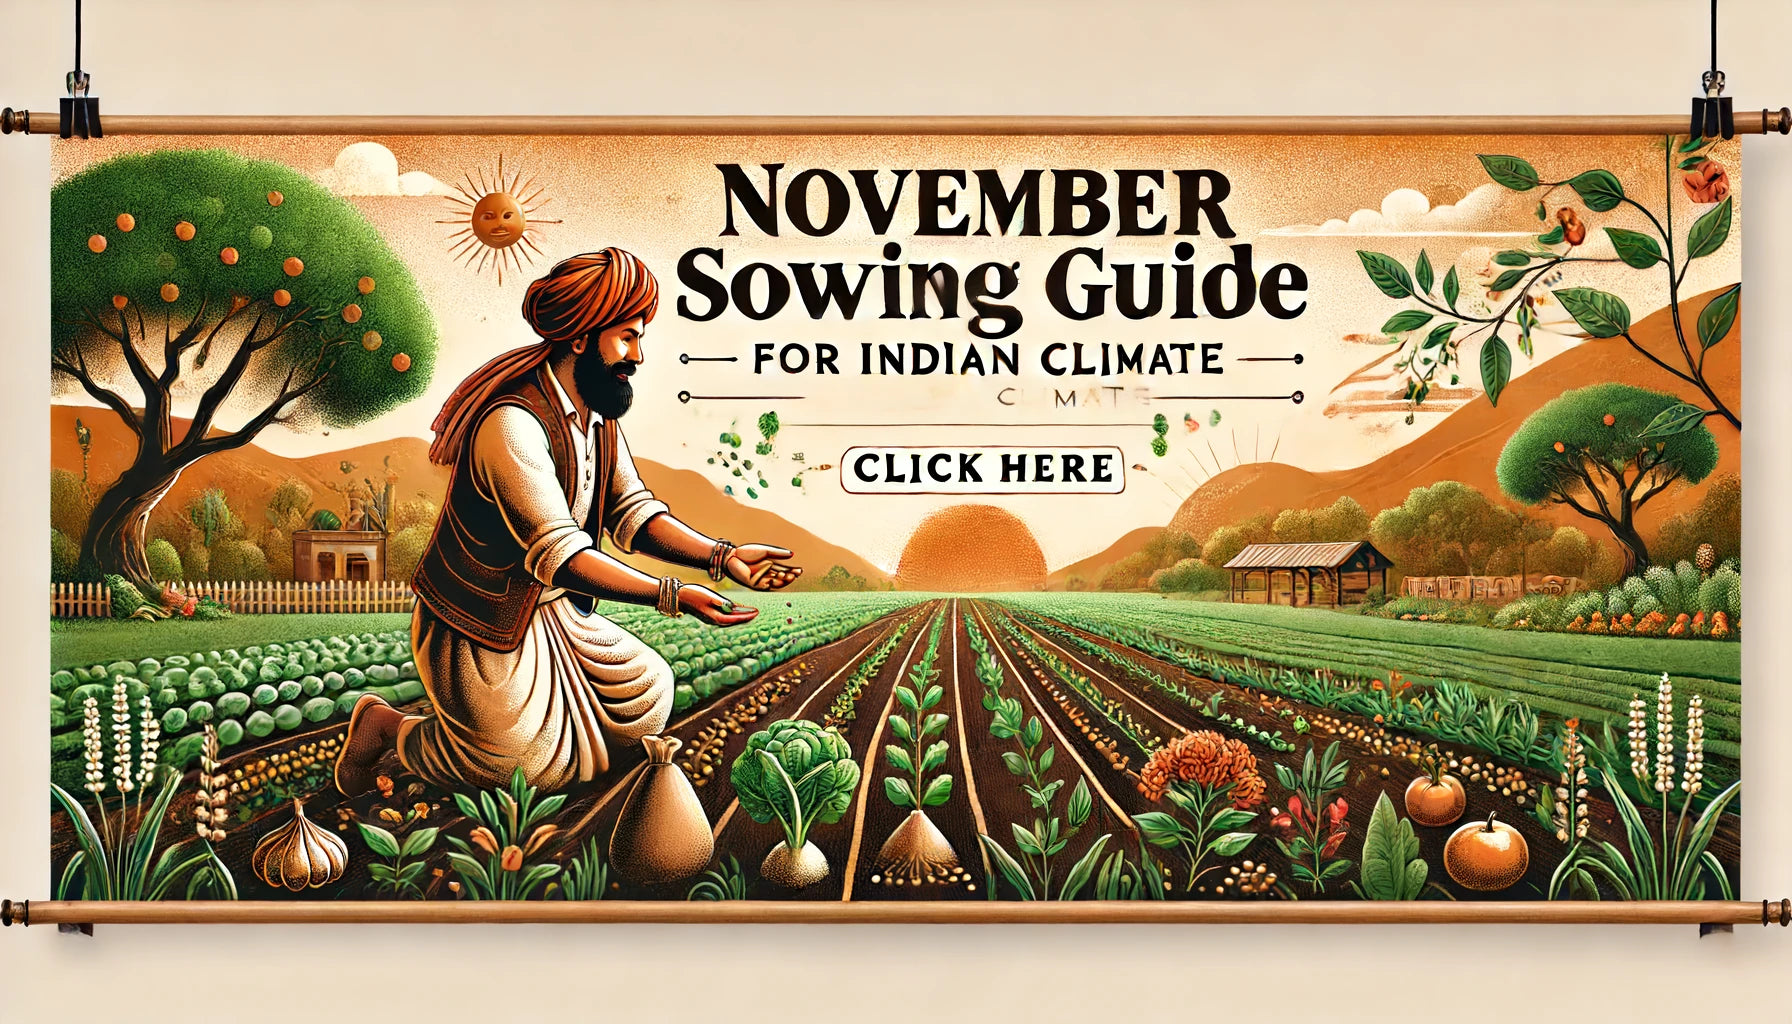 November Sowing Guide for Vegetables, Flowers, and Exotic Herbs in Indian Climate